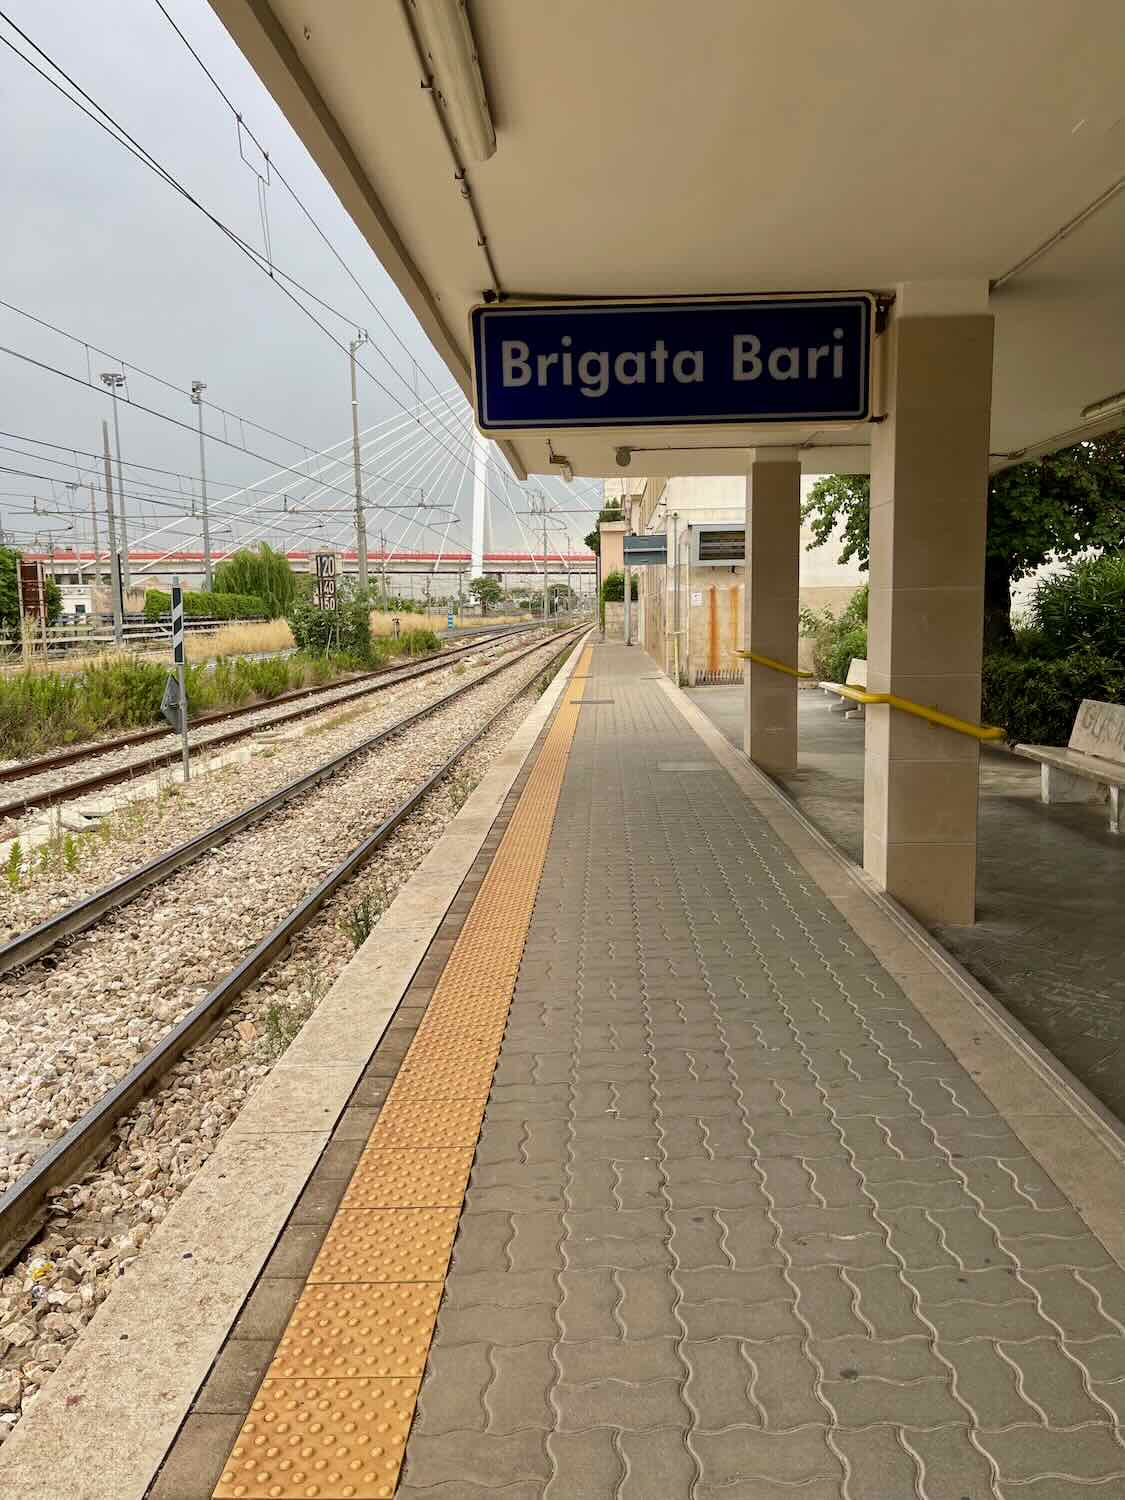 A photo of the Brigata Bari train platform in Bari, Italy. The platform is empty, with tracks running alongside and a sign indicating 'Brigata Bari'. The area is covered with a canopy, and the ground is paved with tiles, including a tactile strip for visually impaired passengers.